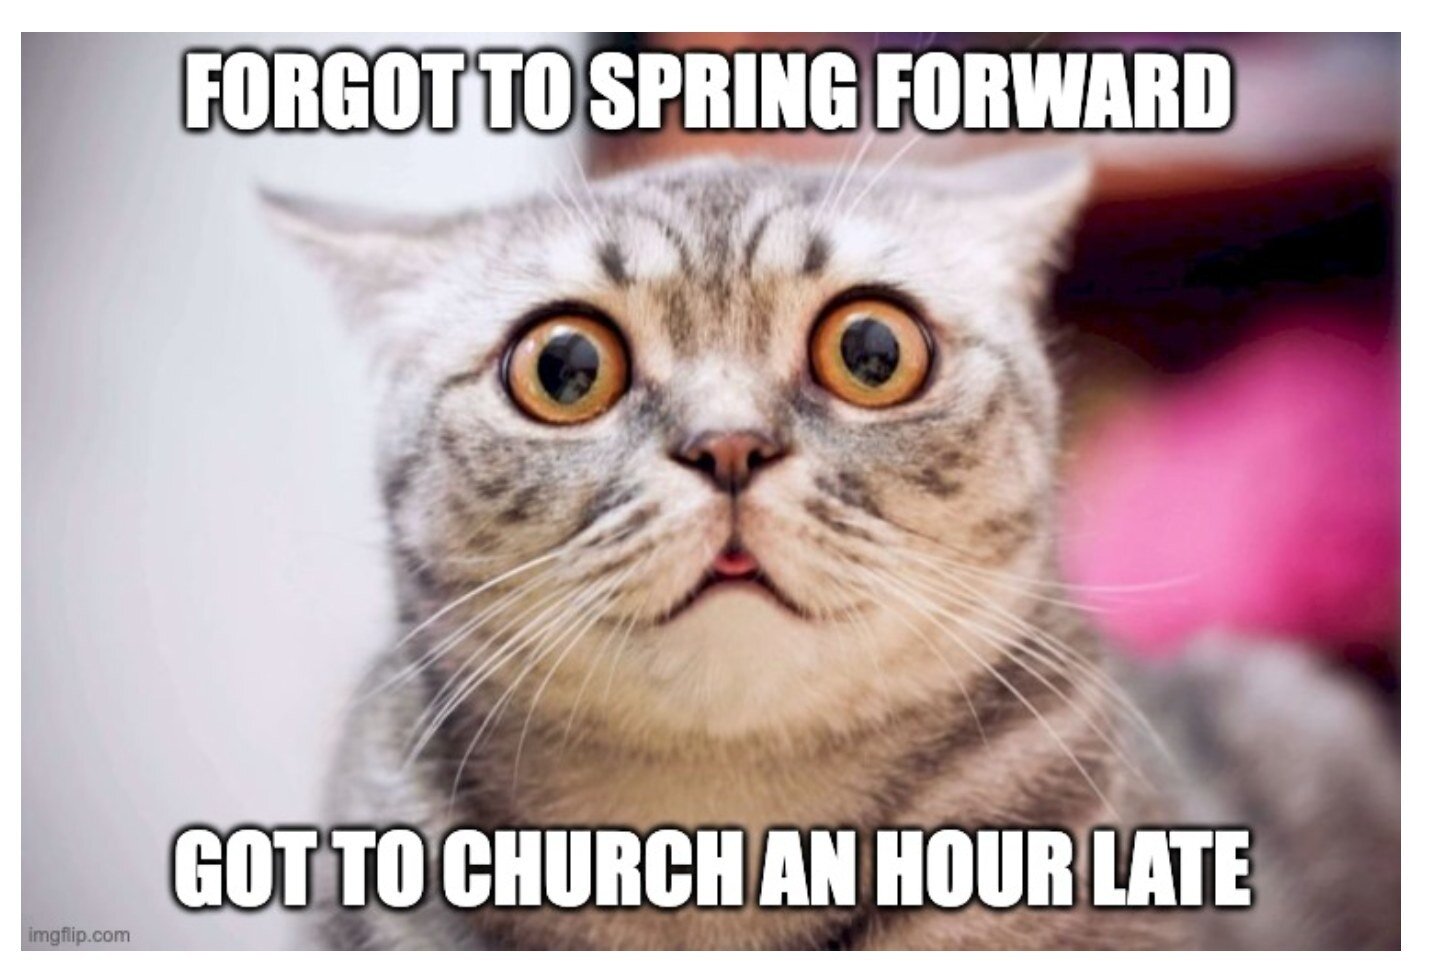 Don&rsquo;t be like this little guy!
Set your clocks forward tonight so you won&rsquo;t be late for church tomorrow 🙈

#daylightsavings #daylightsavingstime #springforward #fallback #spring #timechange #daylightsavingtime #time